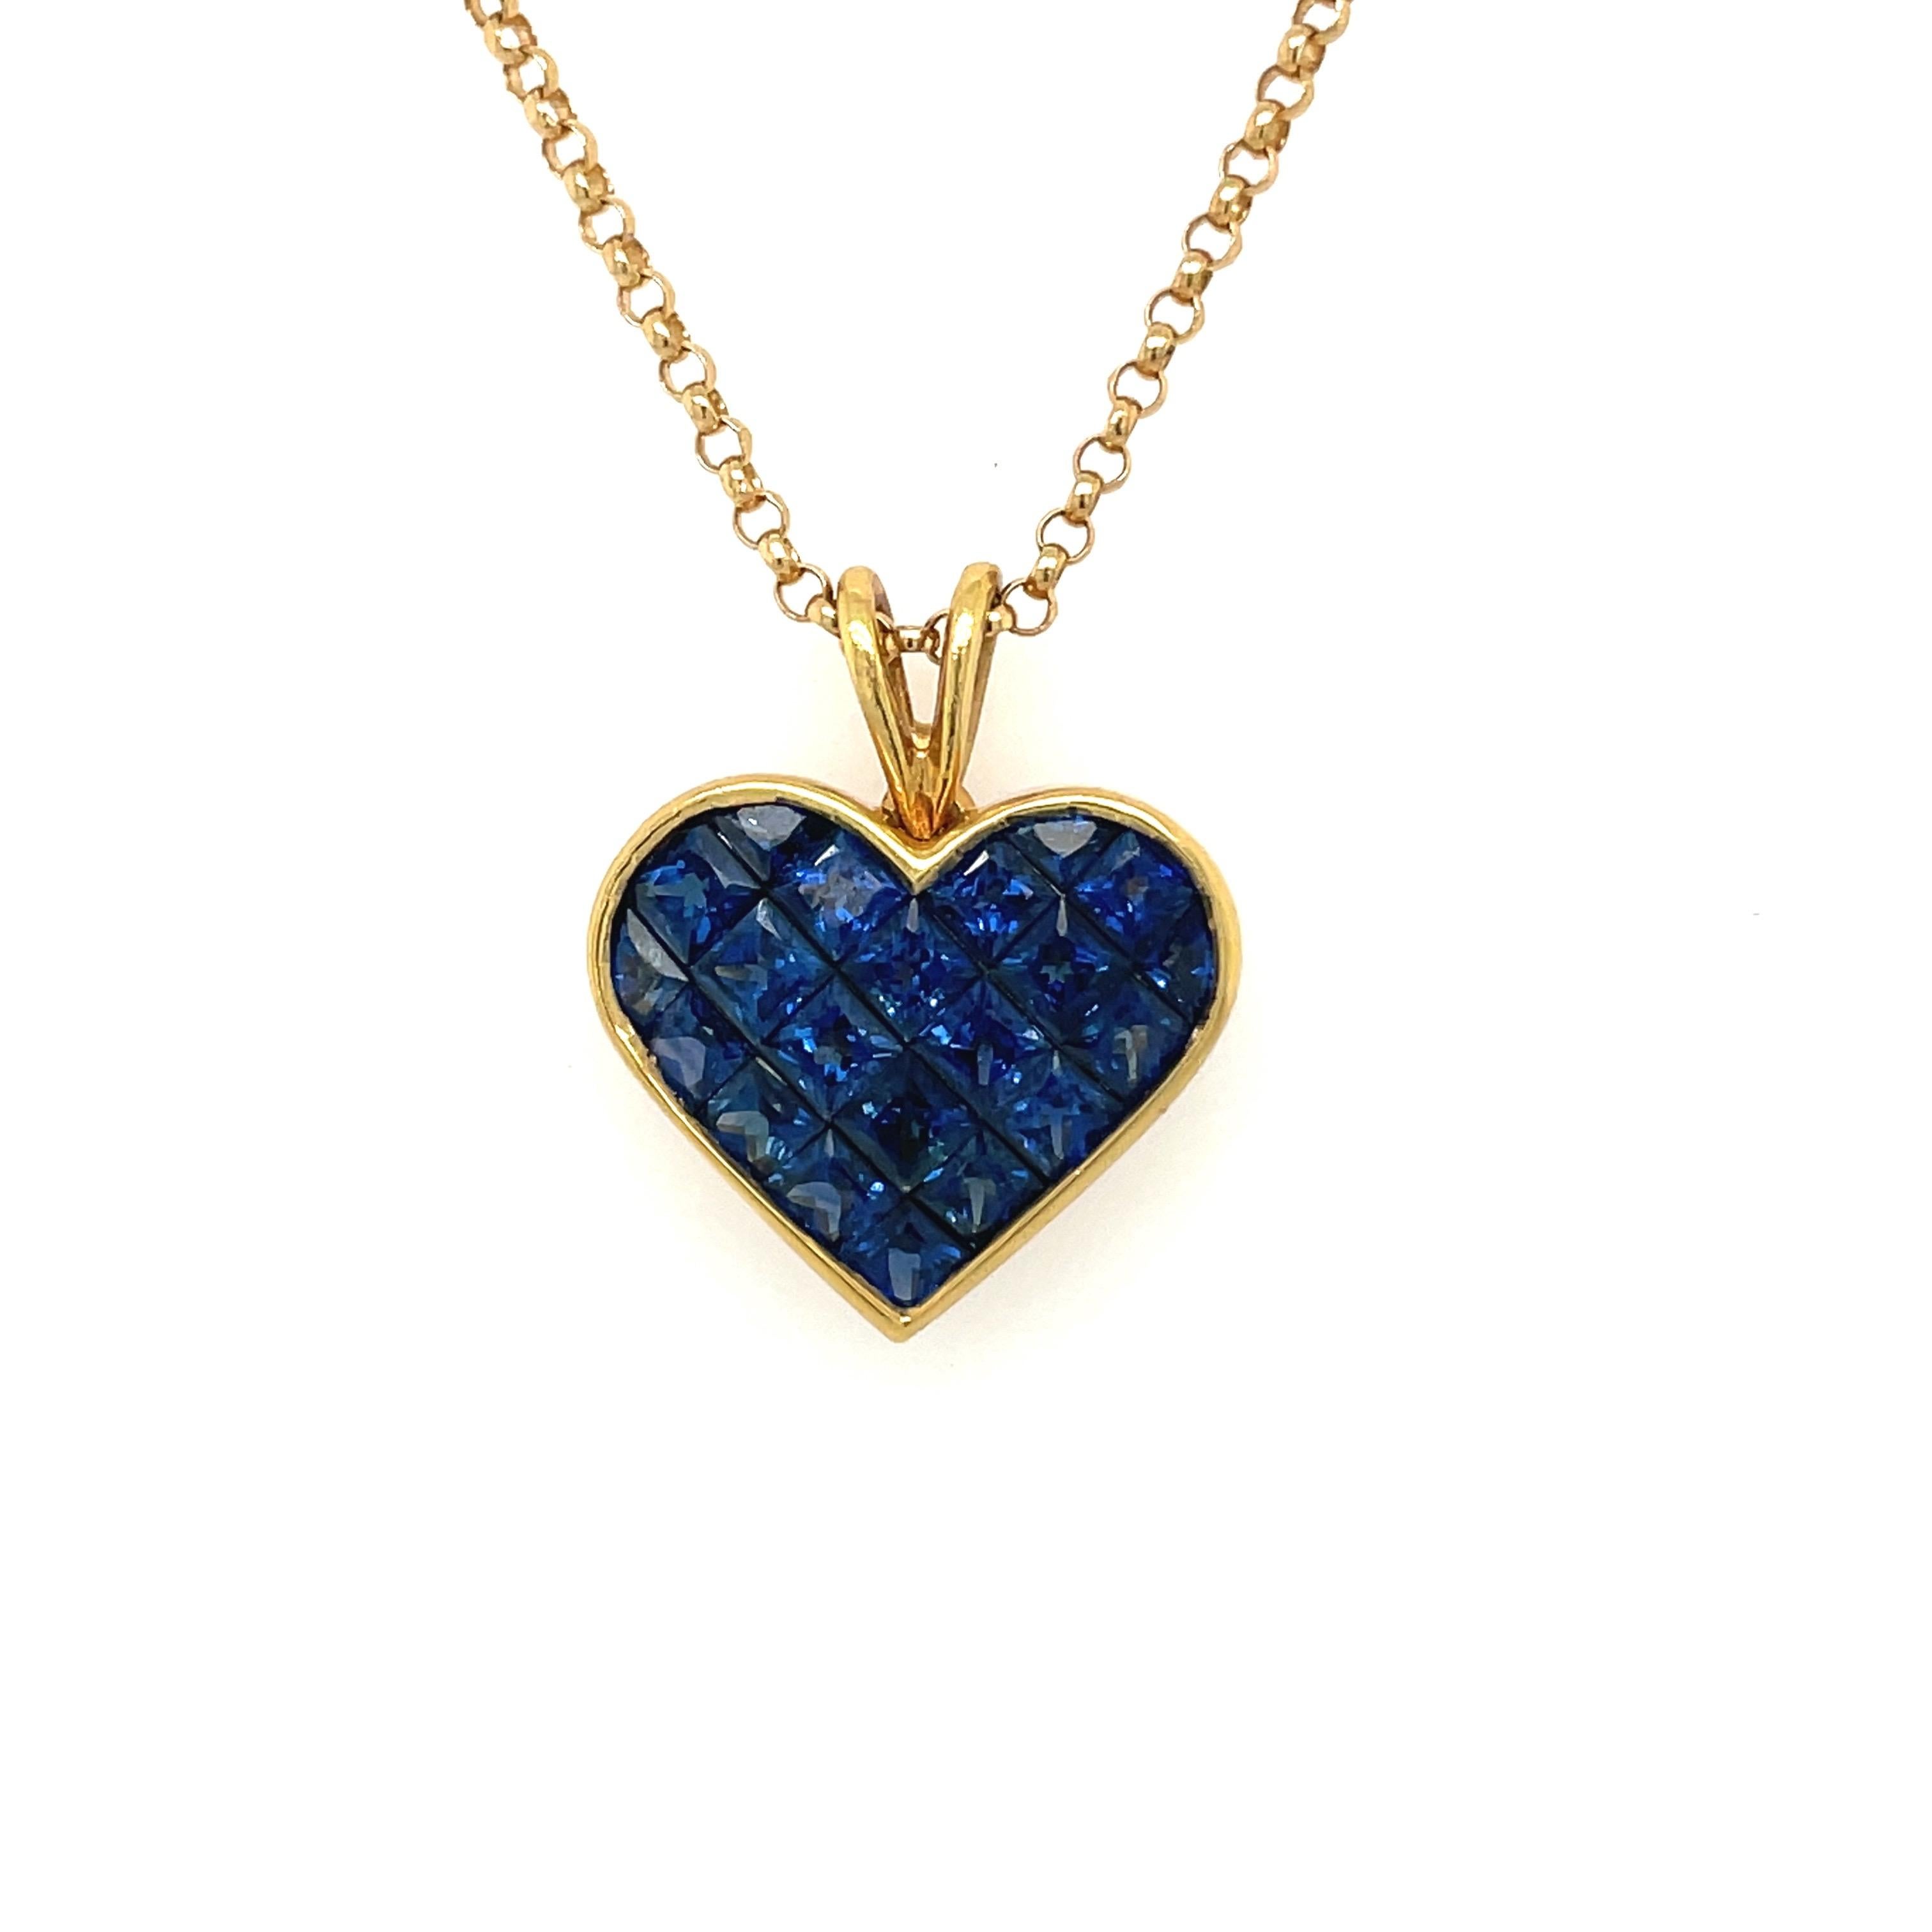 Under the trademark Quadrillion, Bez Ambar created the modern square shaped princess cut blue sapphire. It became one the most innovative and widely used gemstone cuts of the 21st century.
This magnificent 18 karat yellow gold heart is set with 2.53